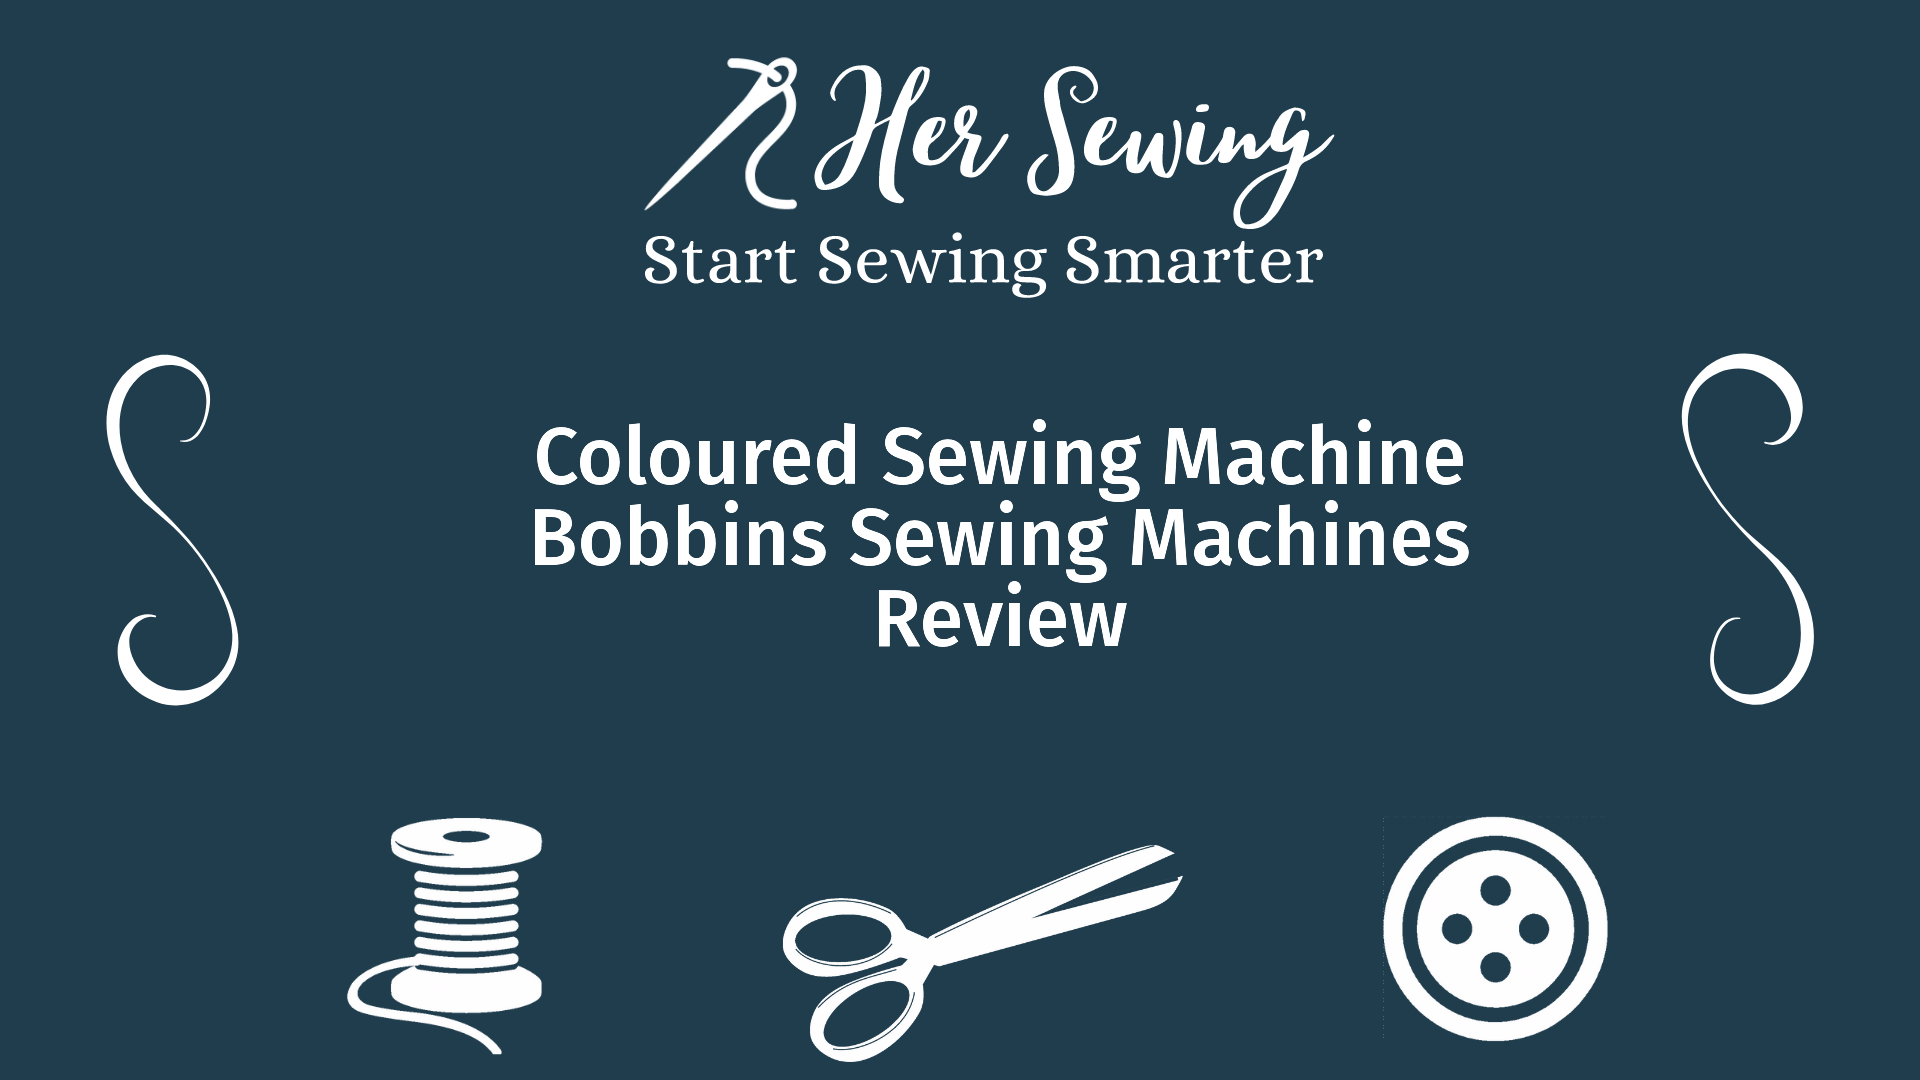 Coloured Sewing Machine Bobbins Sewing Machines Review